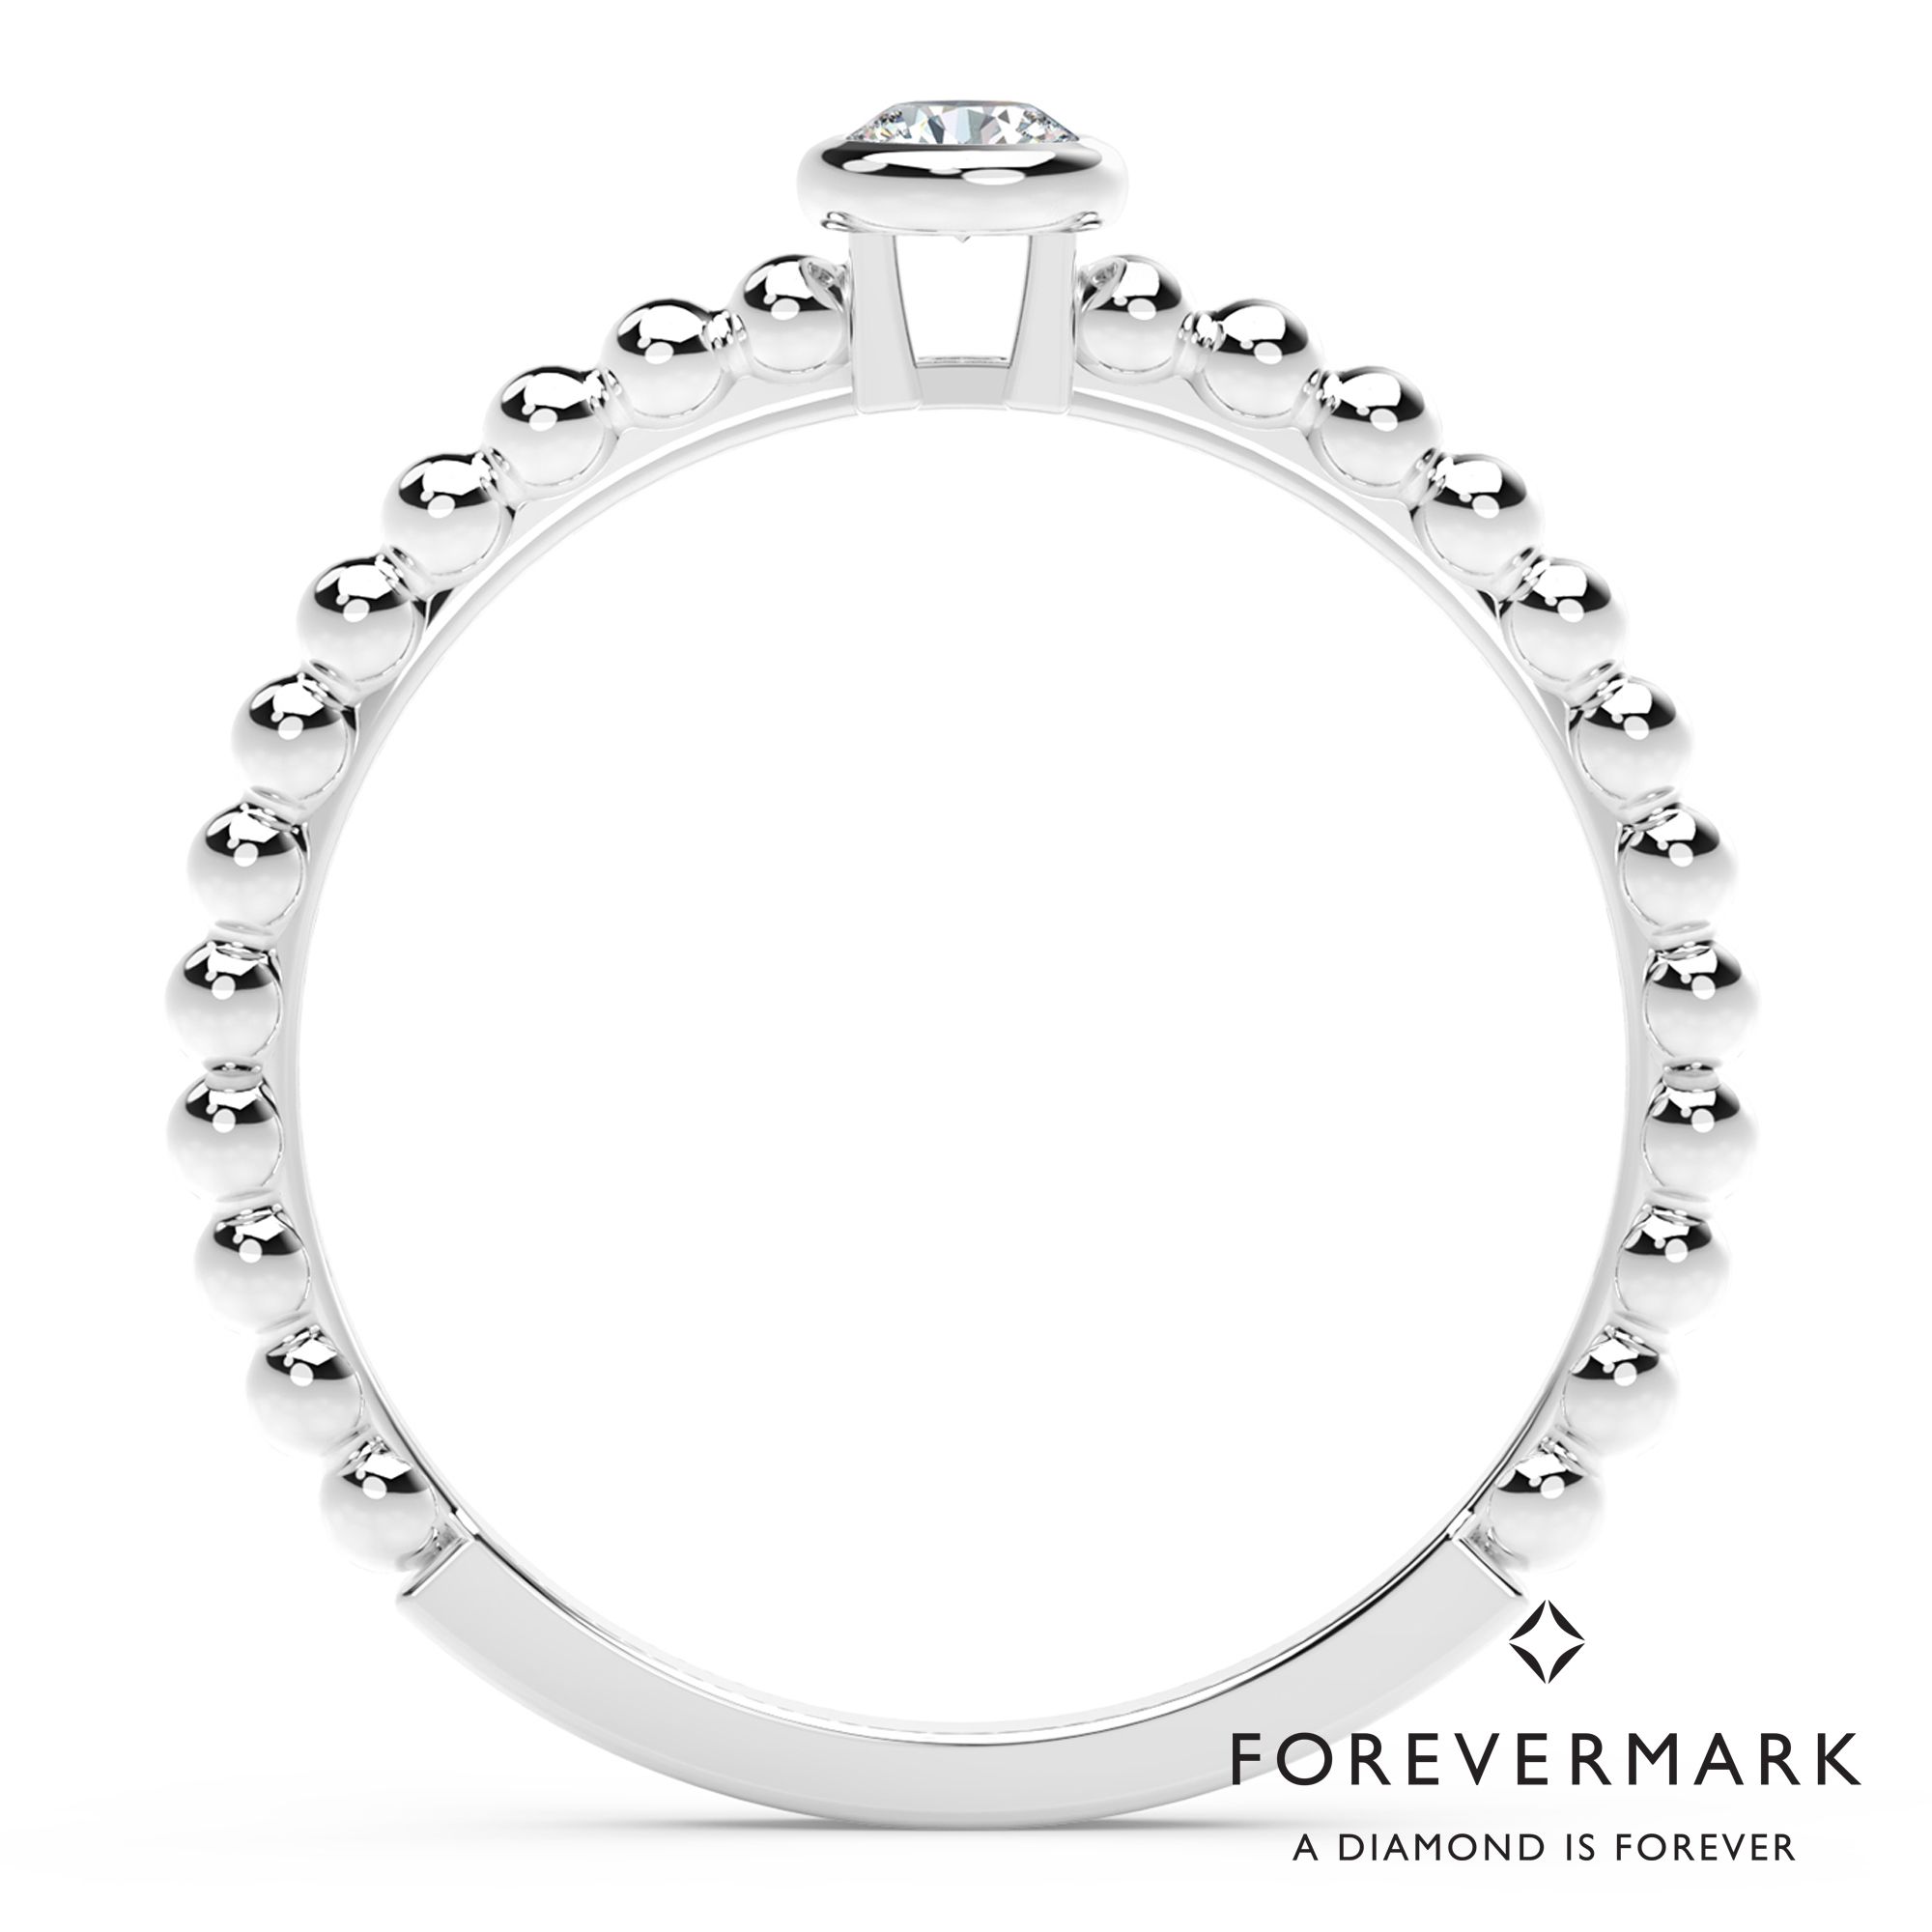 De Beers Forevermark Tribute Collection Diamond Stackable Ring in 18kt White Gold (1/10ct)